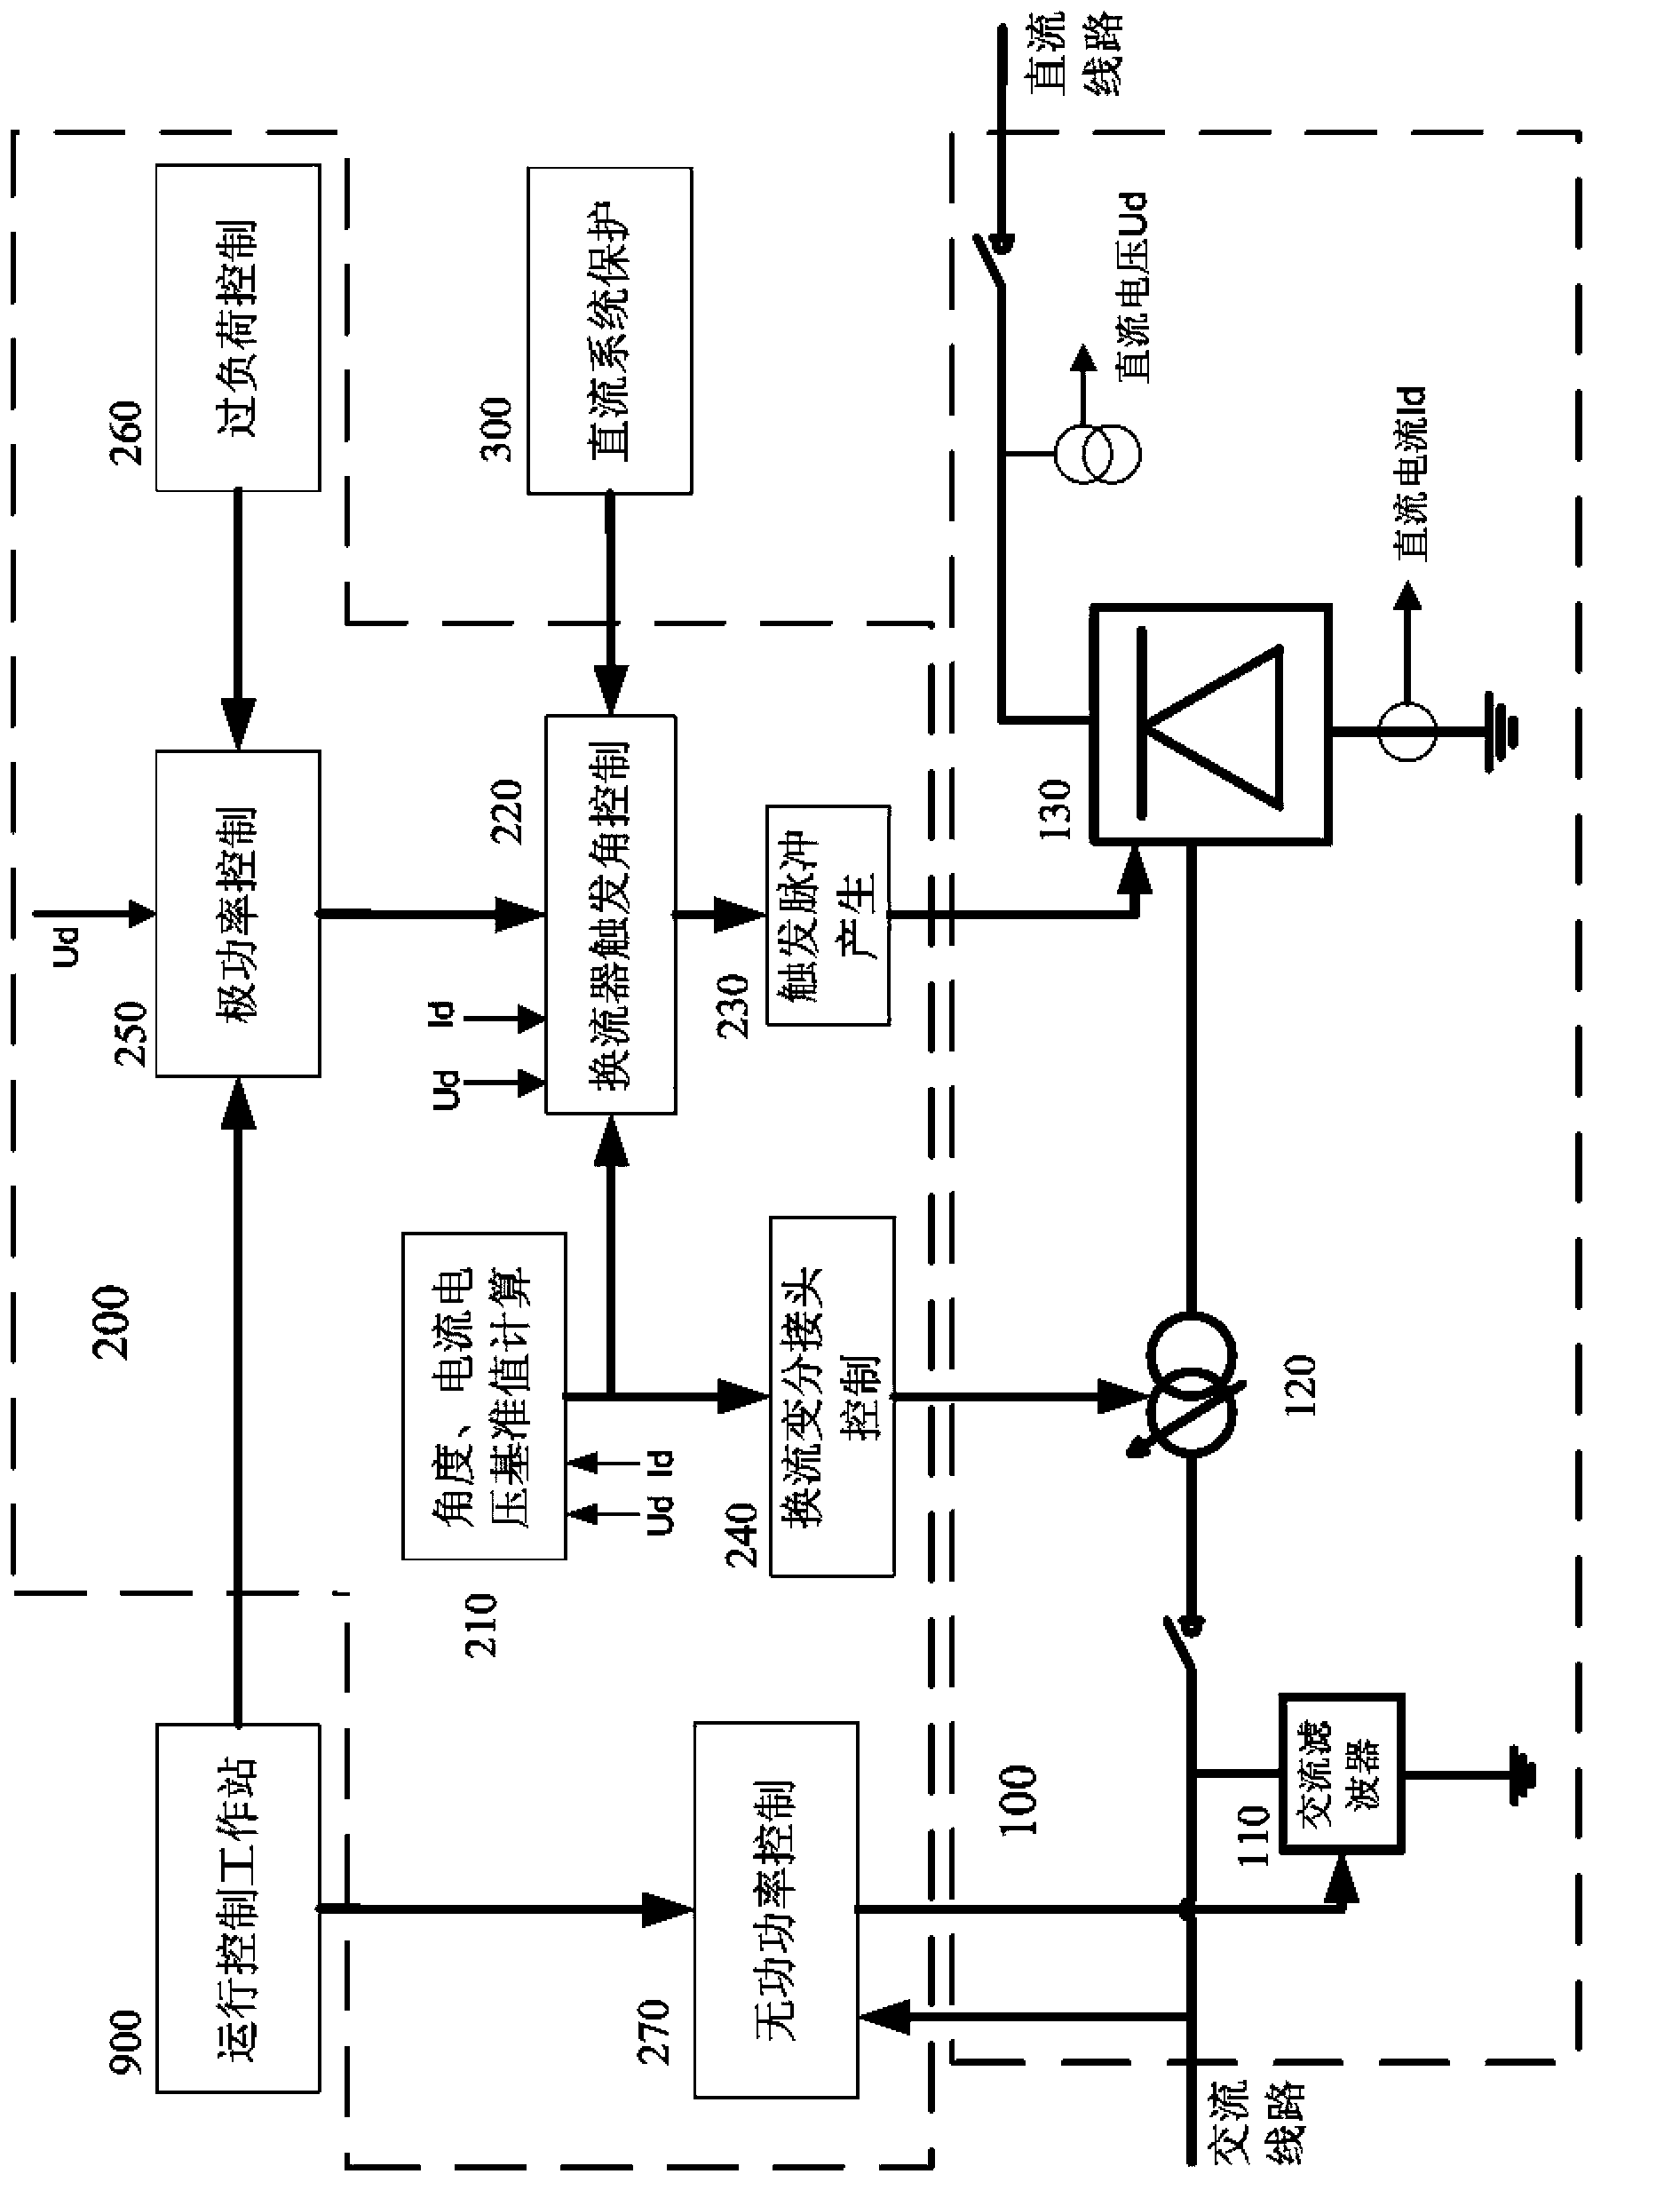 Direct-current control protection simulation device based on RTDS